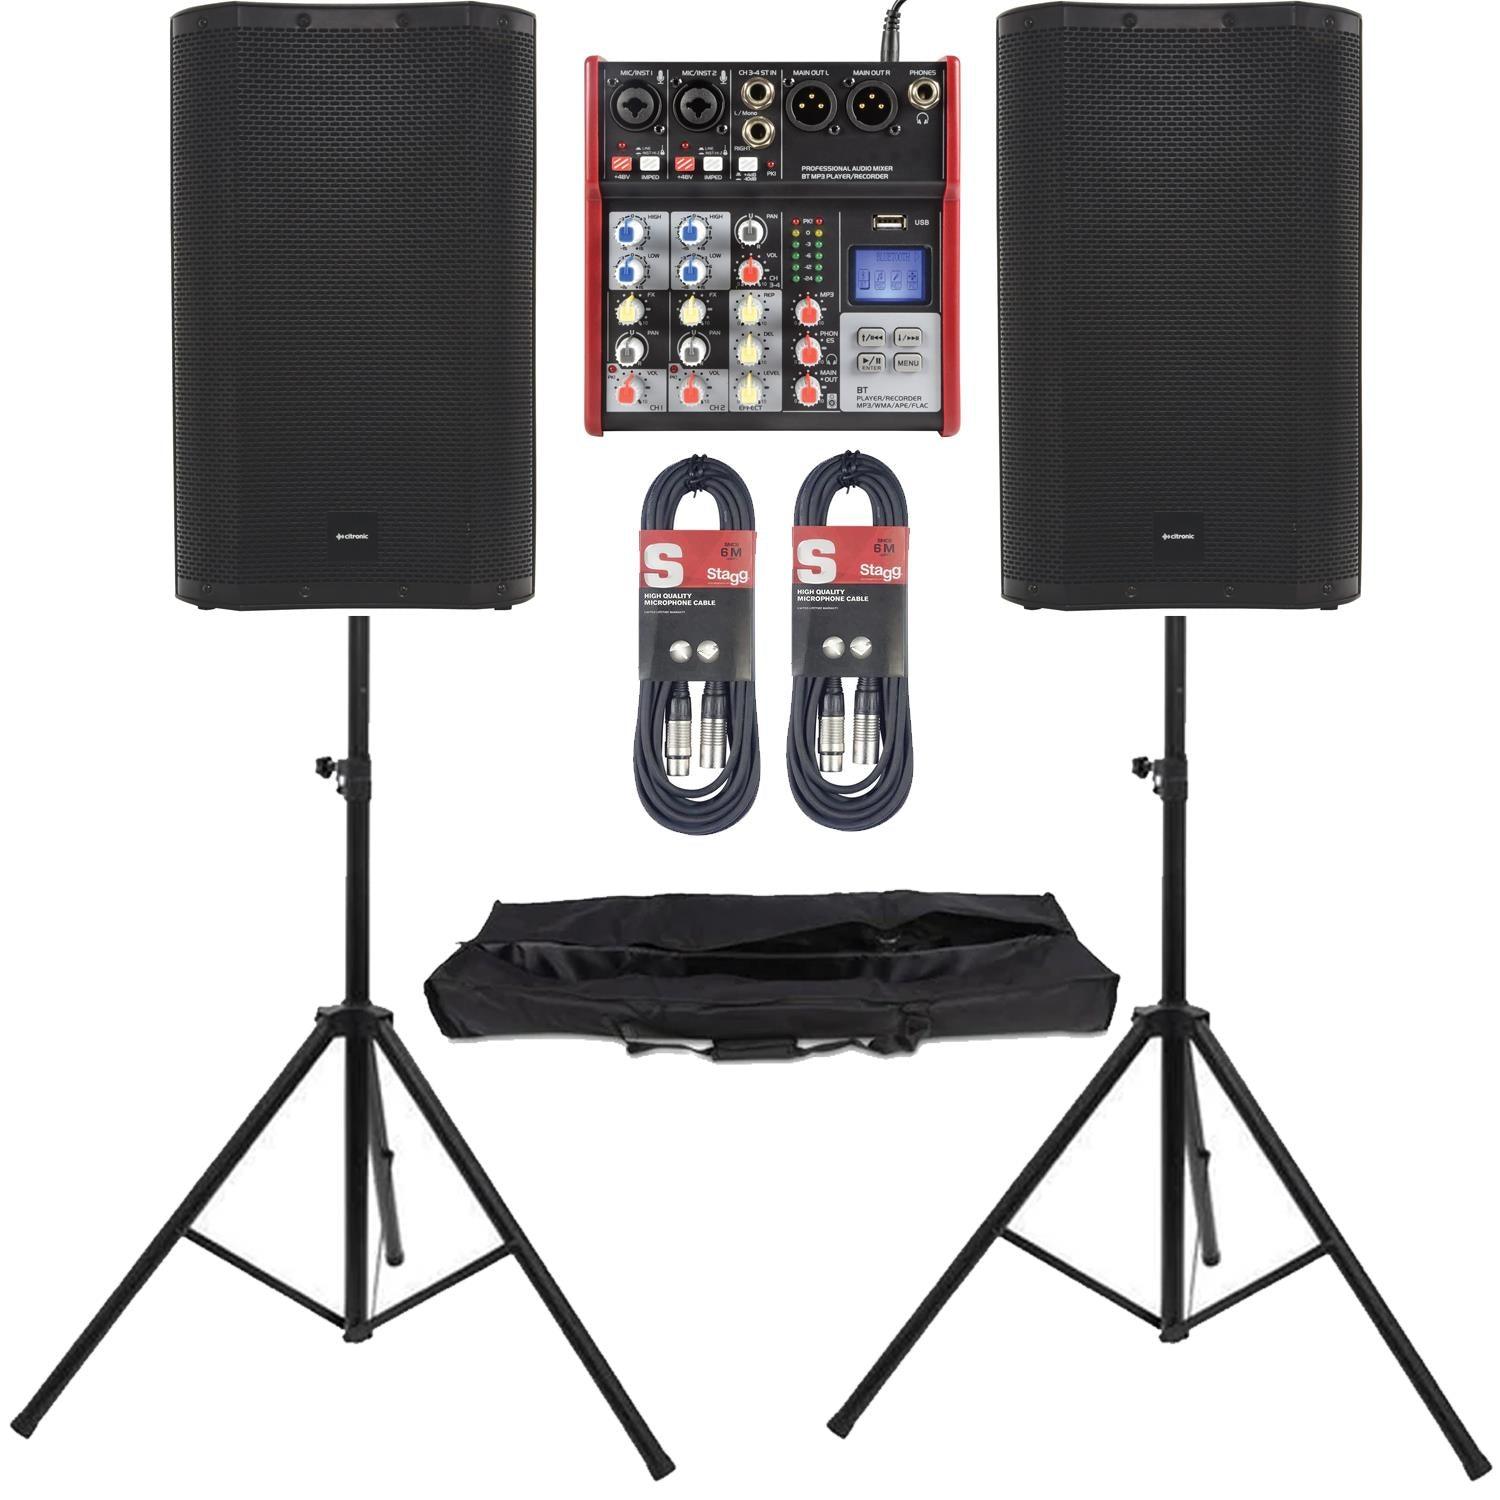 2 x Citronic CASA-12A Active Speakers with Mixer, Stand & Cables - DY Pro Audio